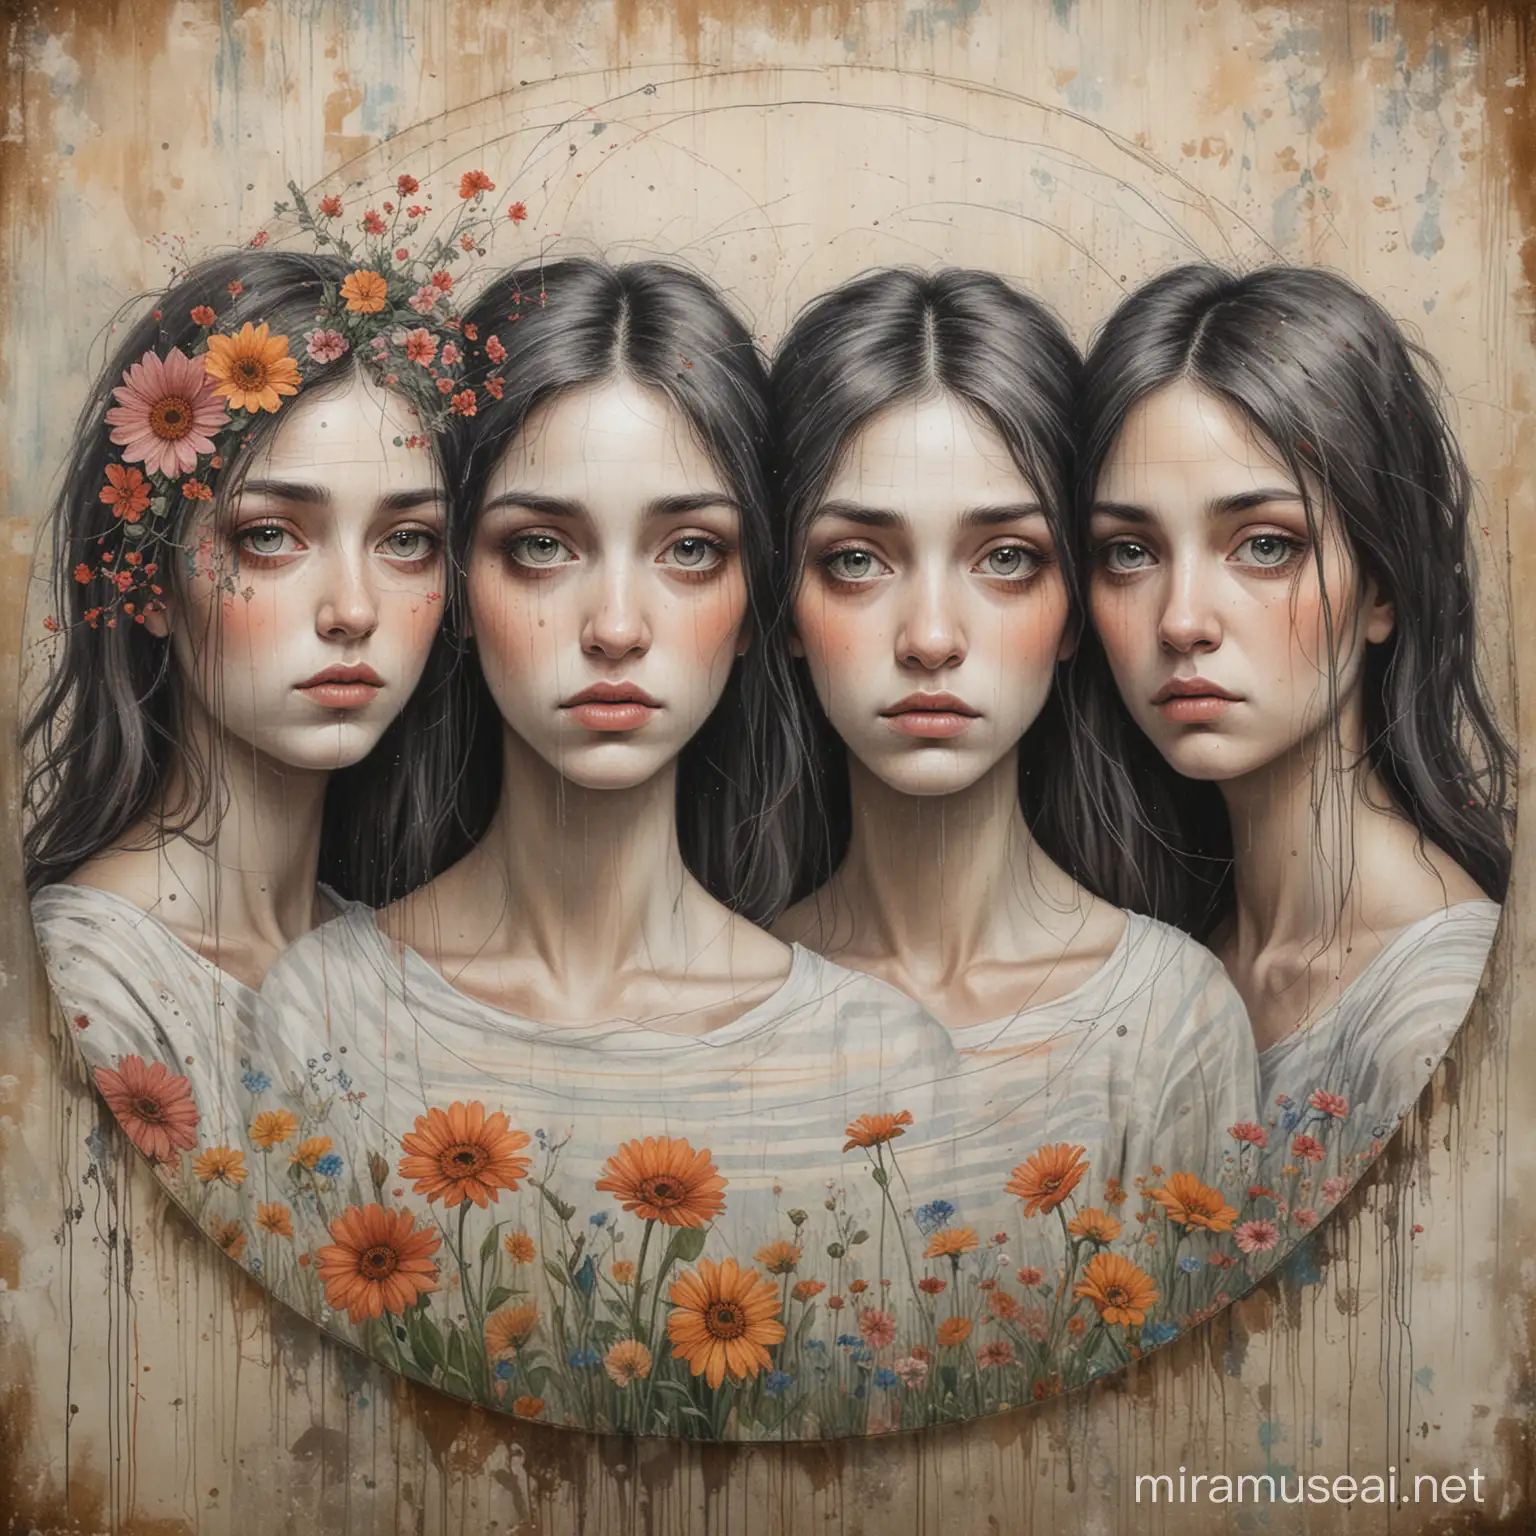 Eerie Mixed Media Painting Three Women with Flowers in Distressed Background